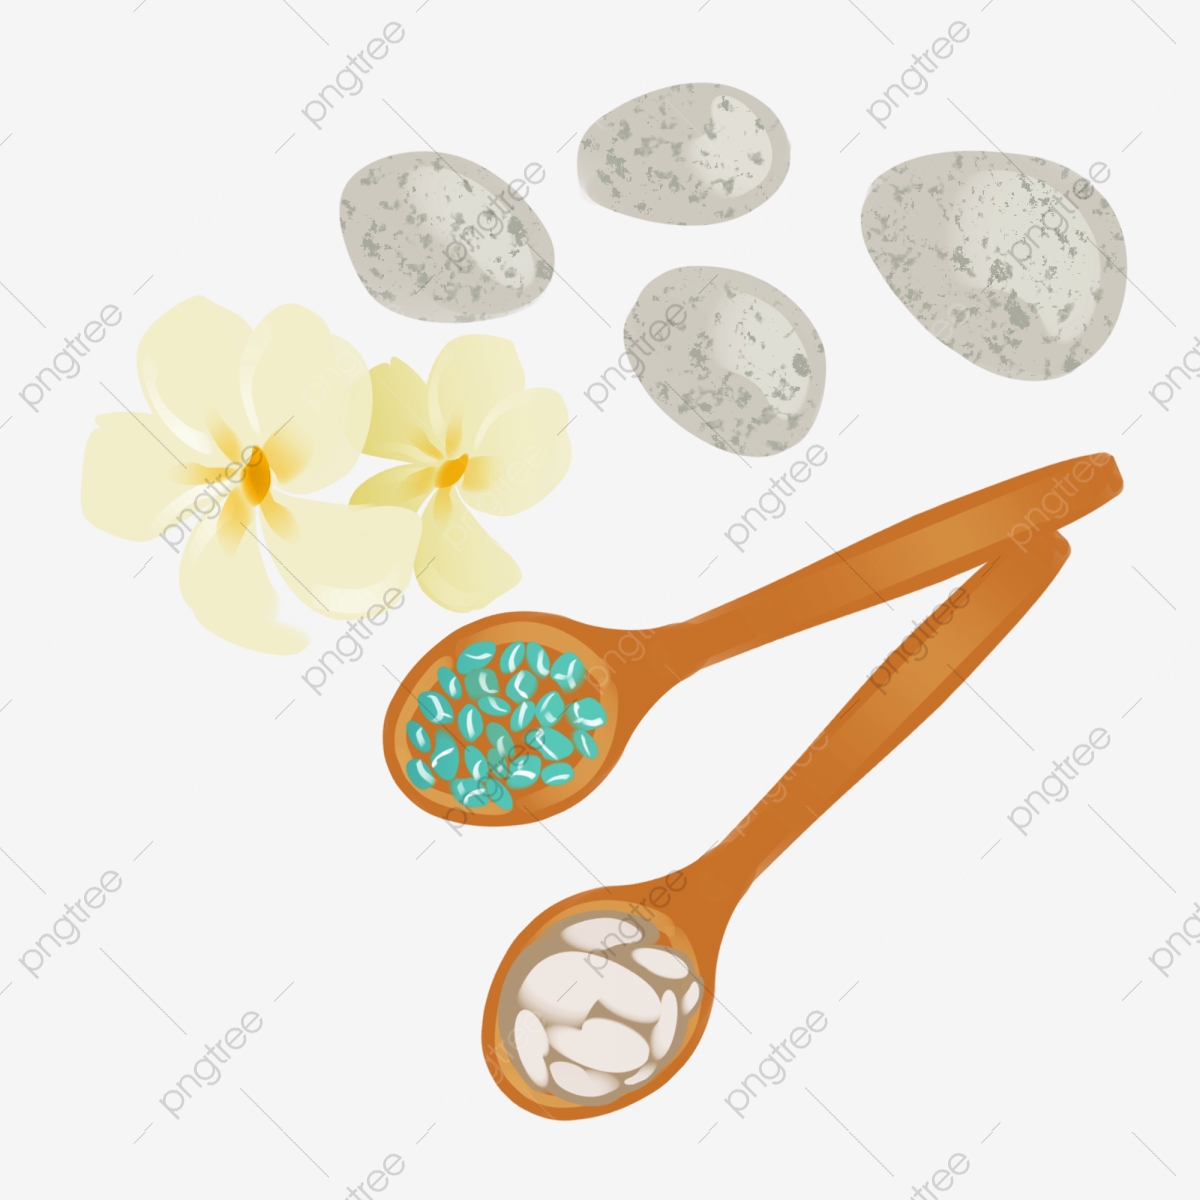 cereal clipart file